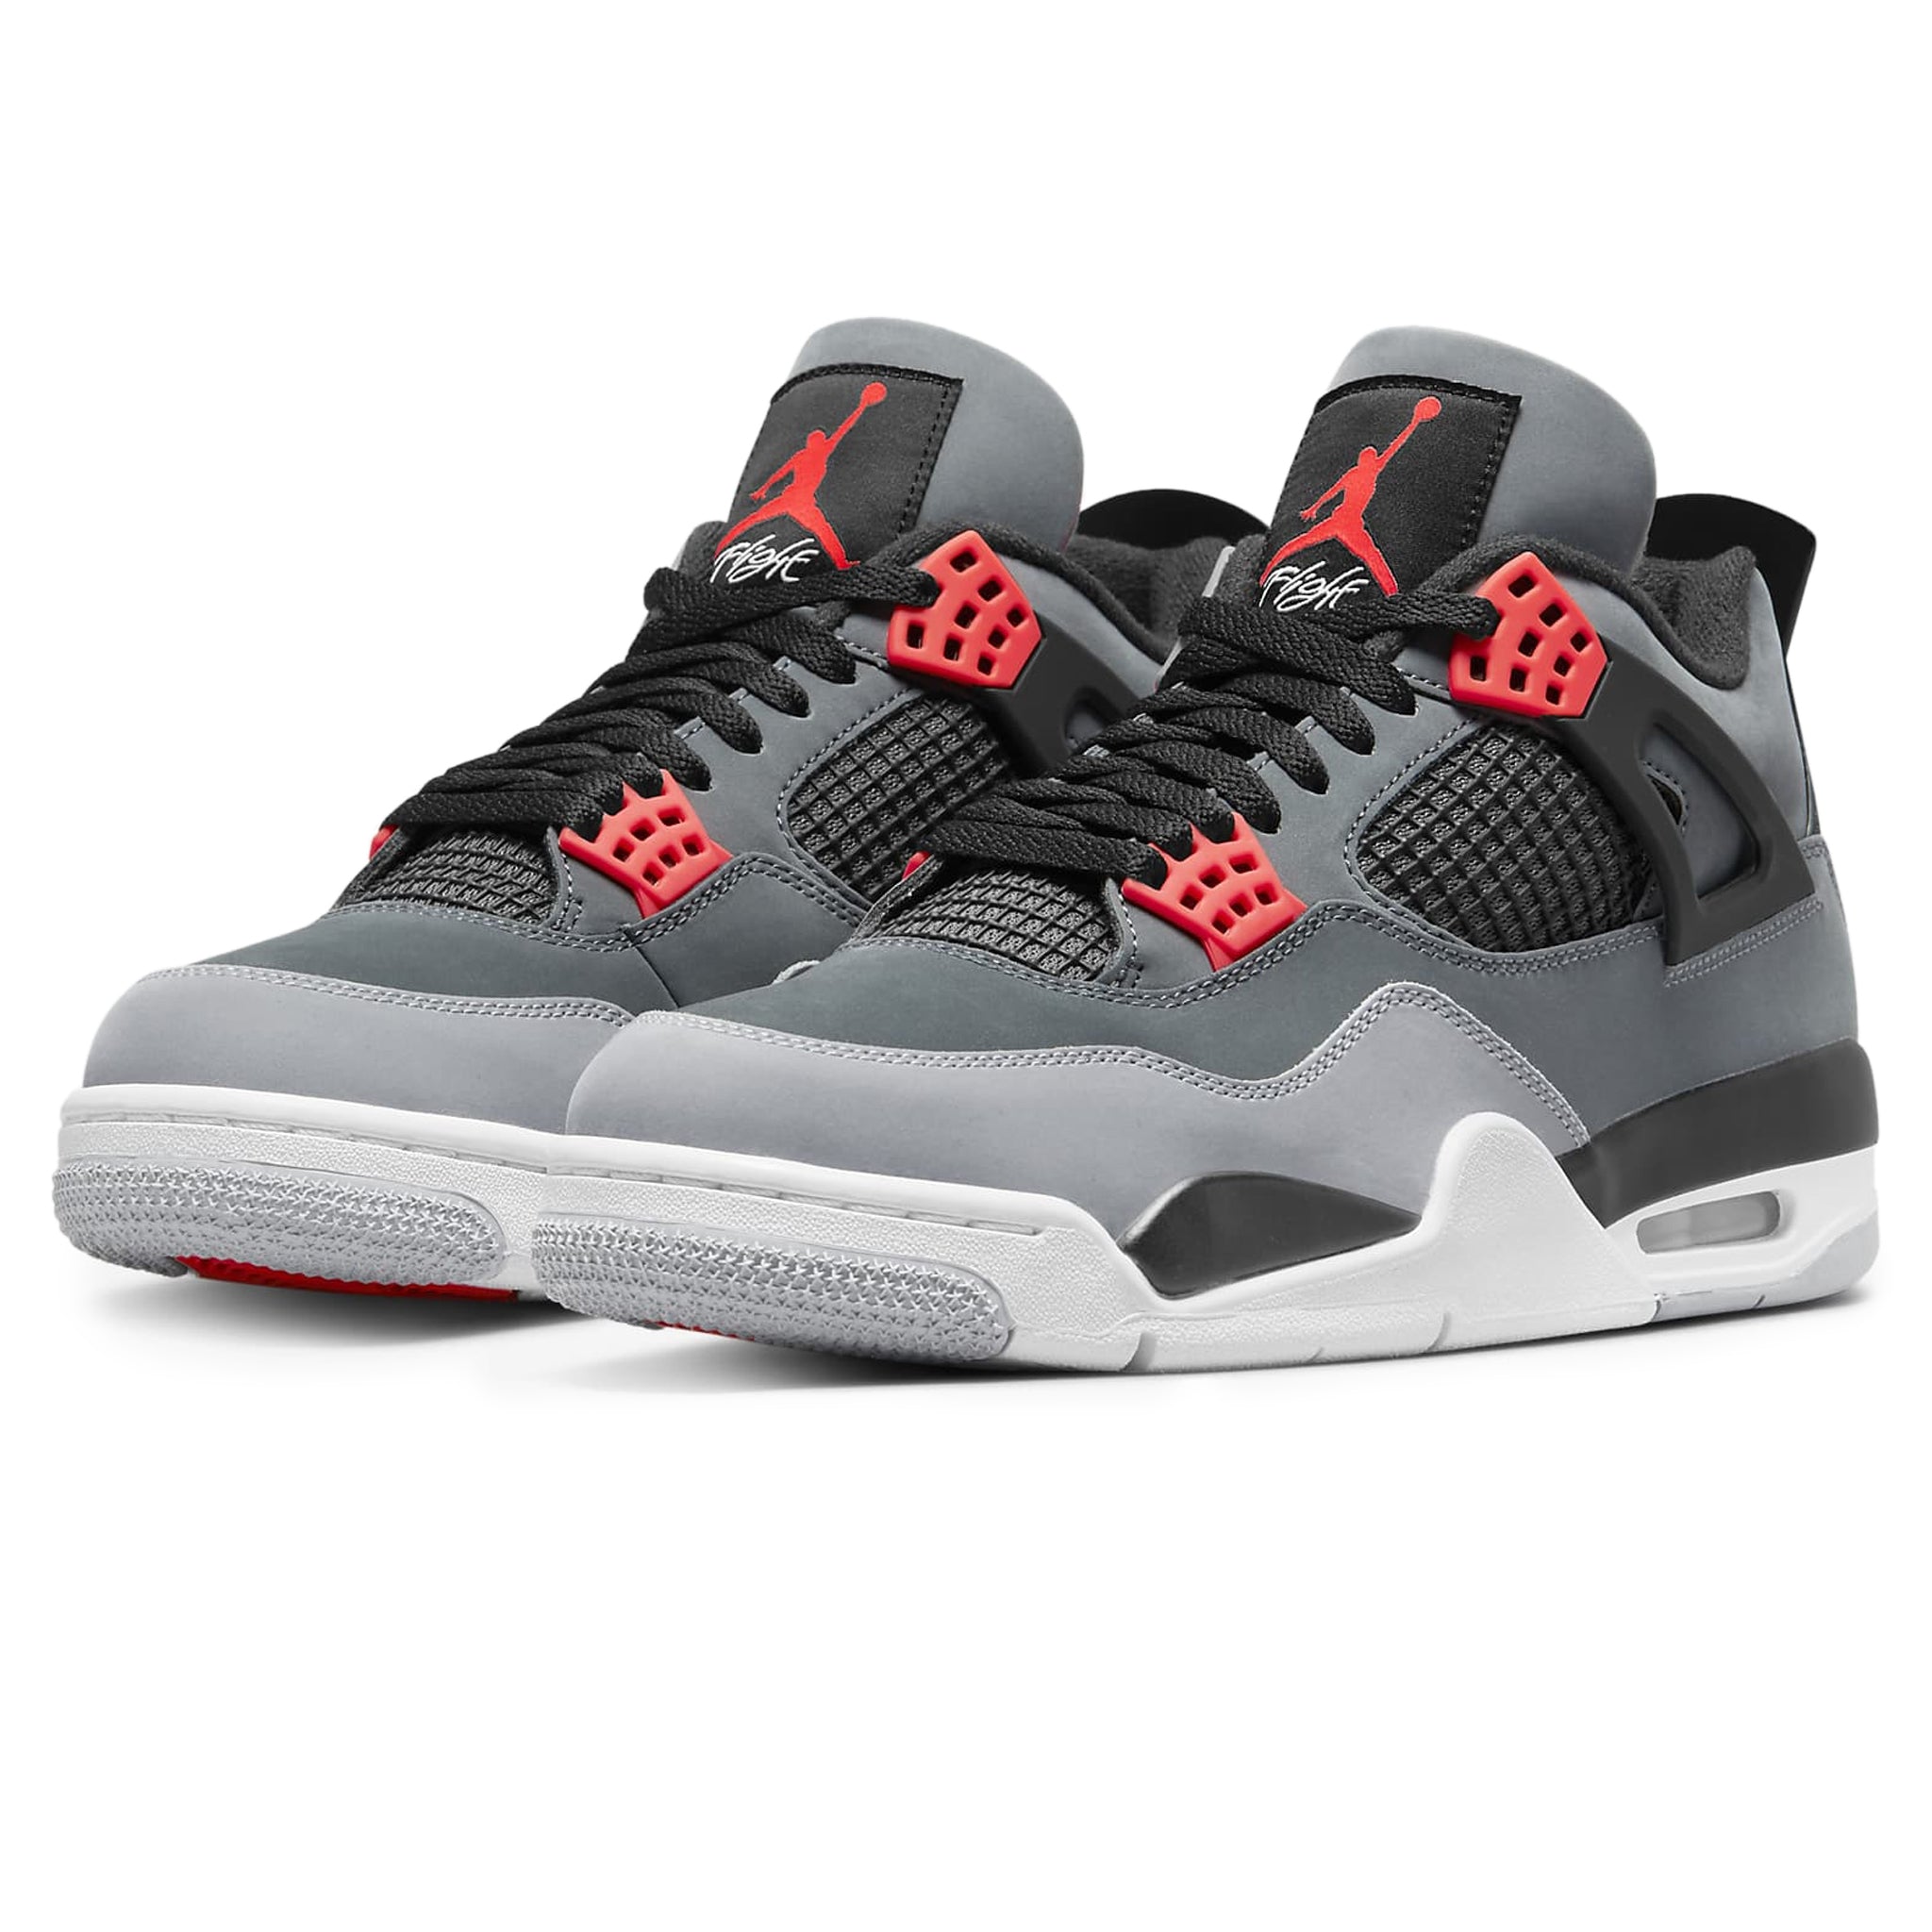 Front side view of Air Jordan 4 Retro Infrared DH6927-061